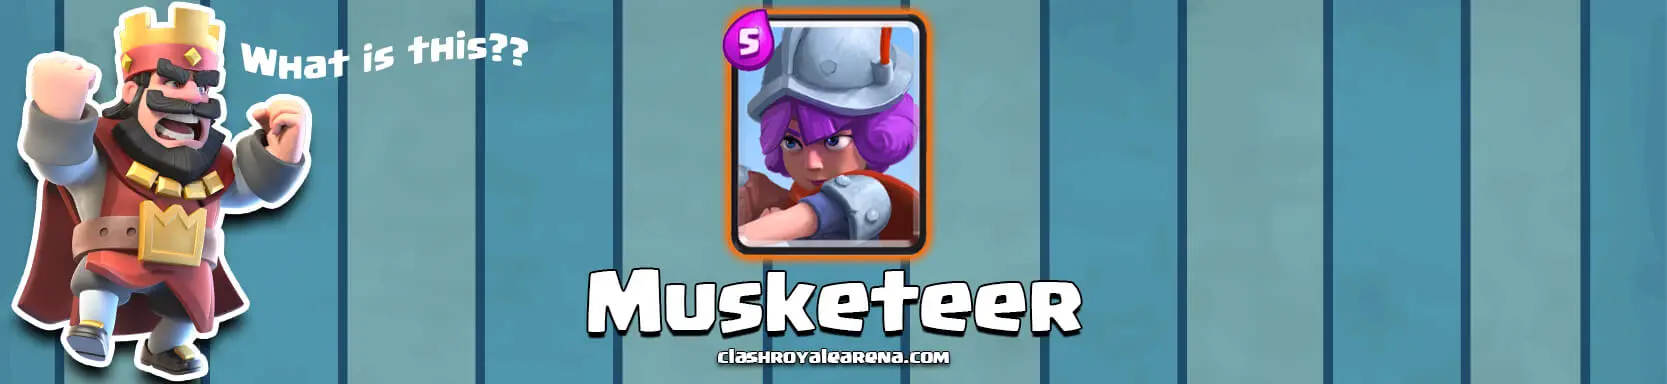 Musketeer Clash Royale - Strategies and Statistics